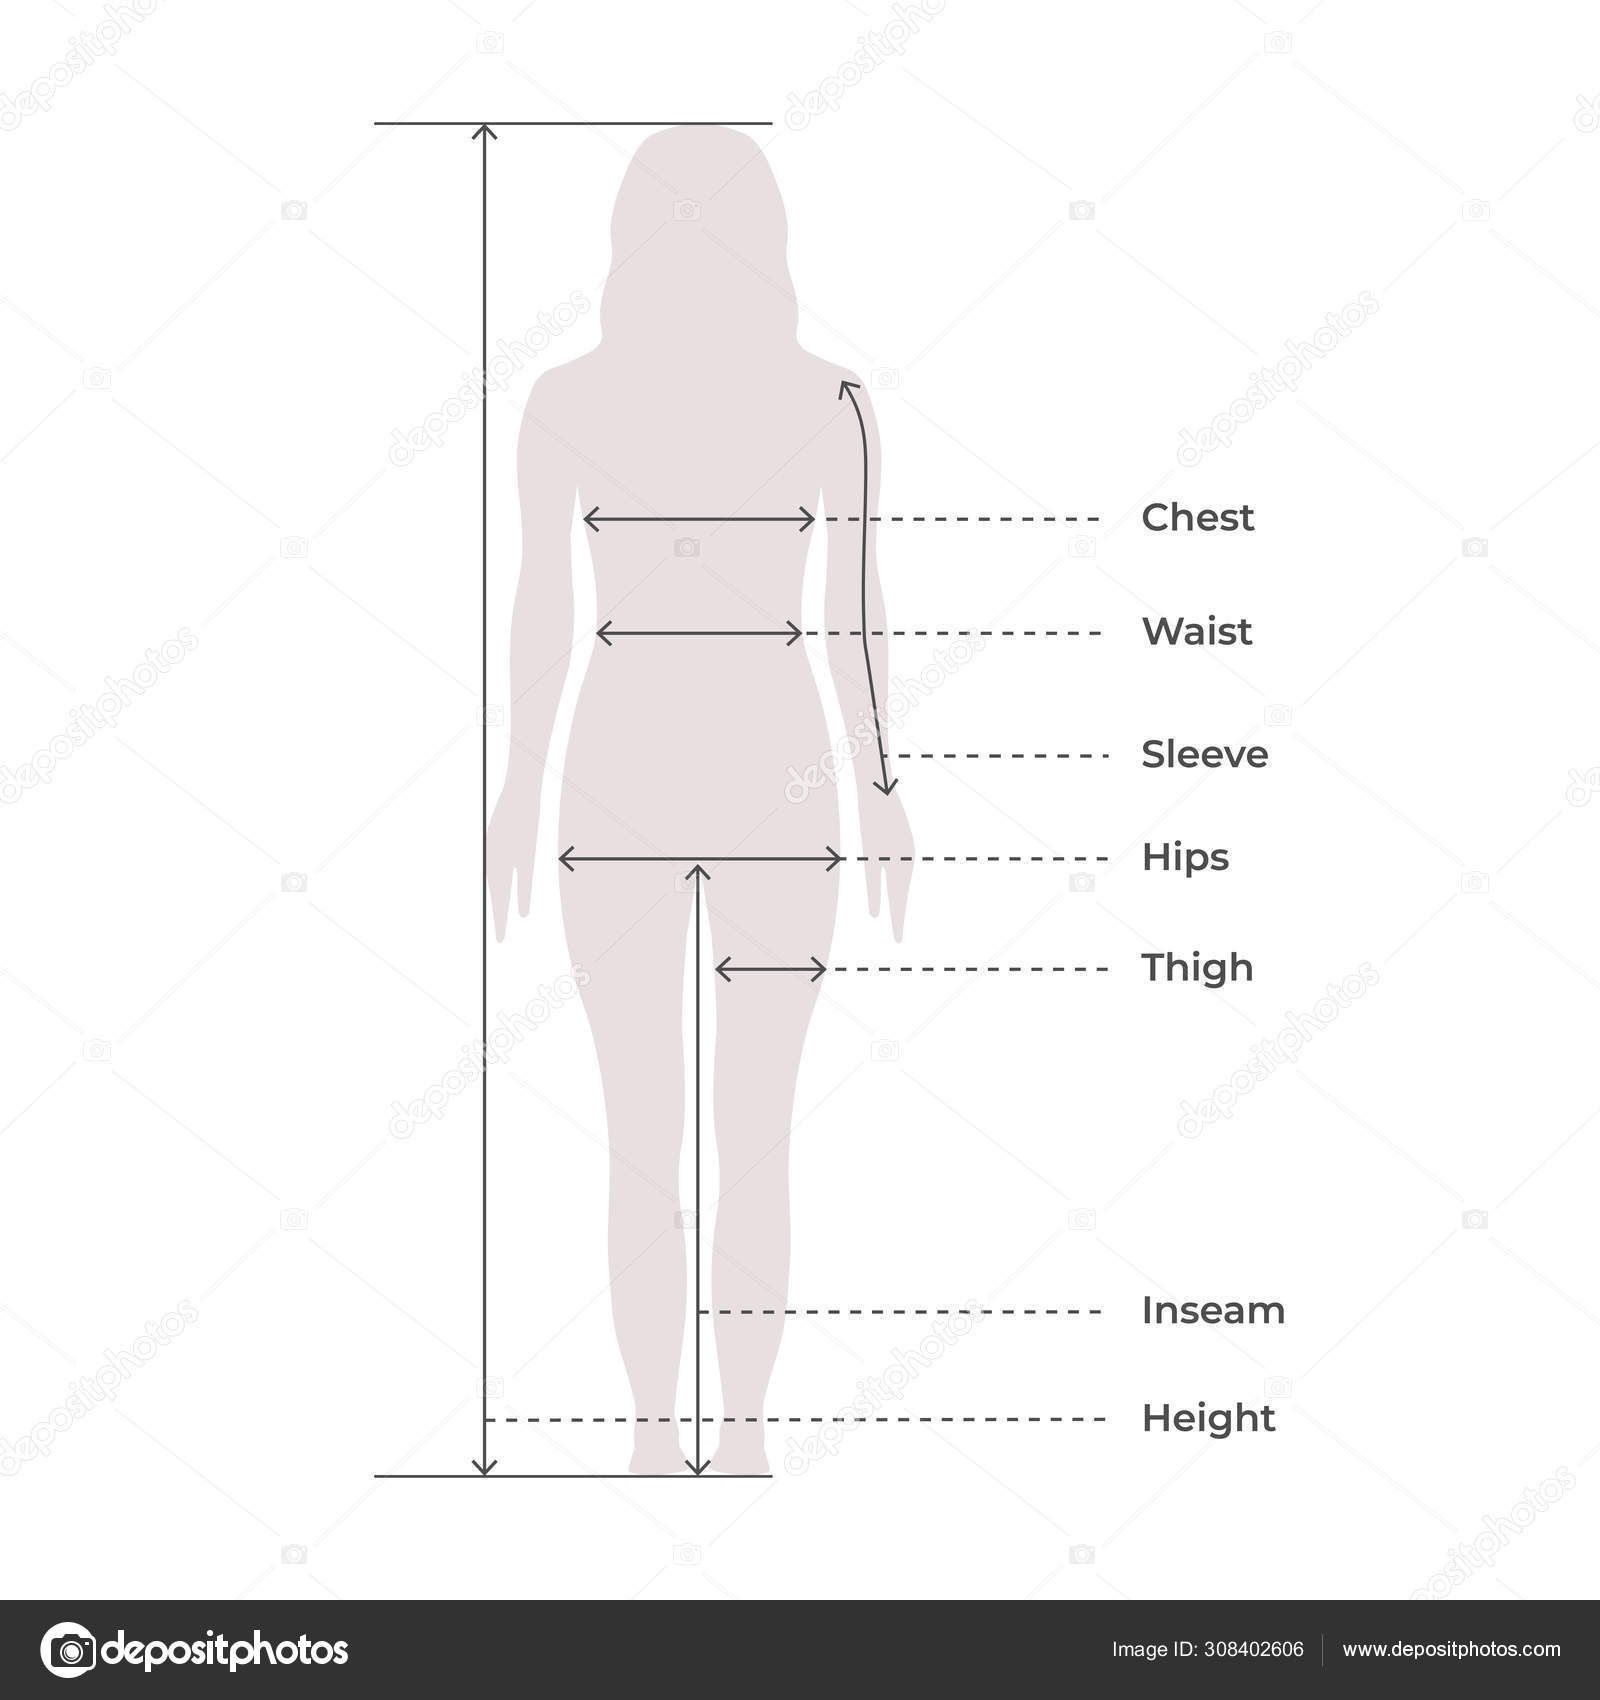 Body Measurements Template from st4.depositphotos.com